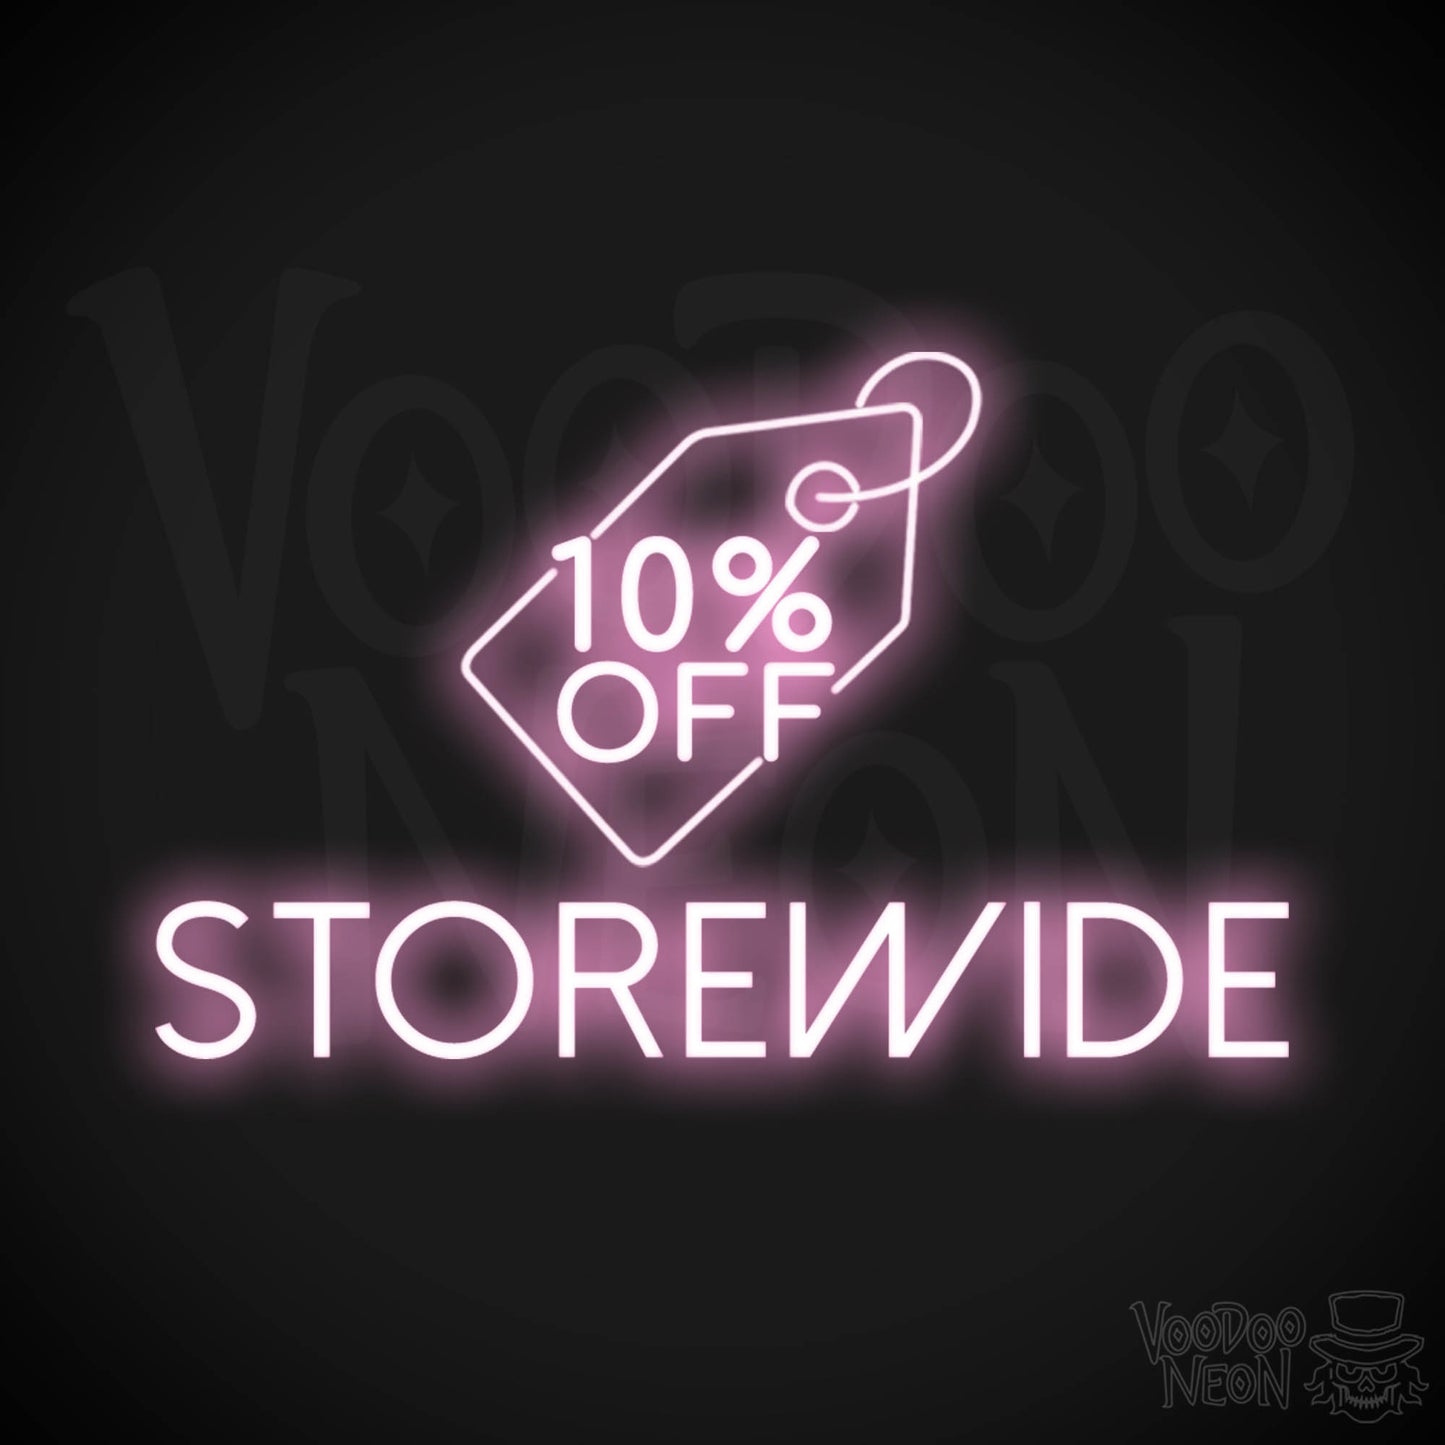 10% Off Storewide Neon Sign - 10% Off Storewide Sign - Neon Shop Signs - Color Light Pink